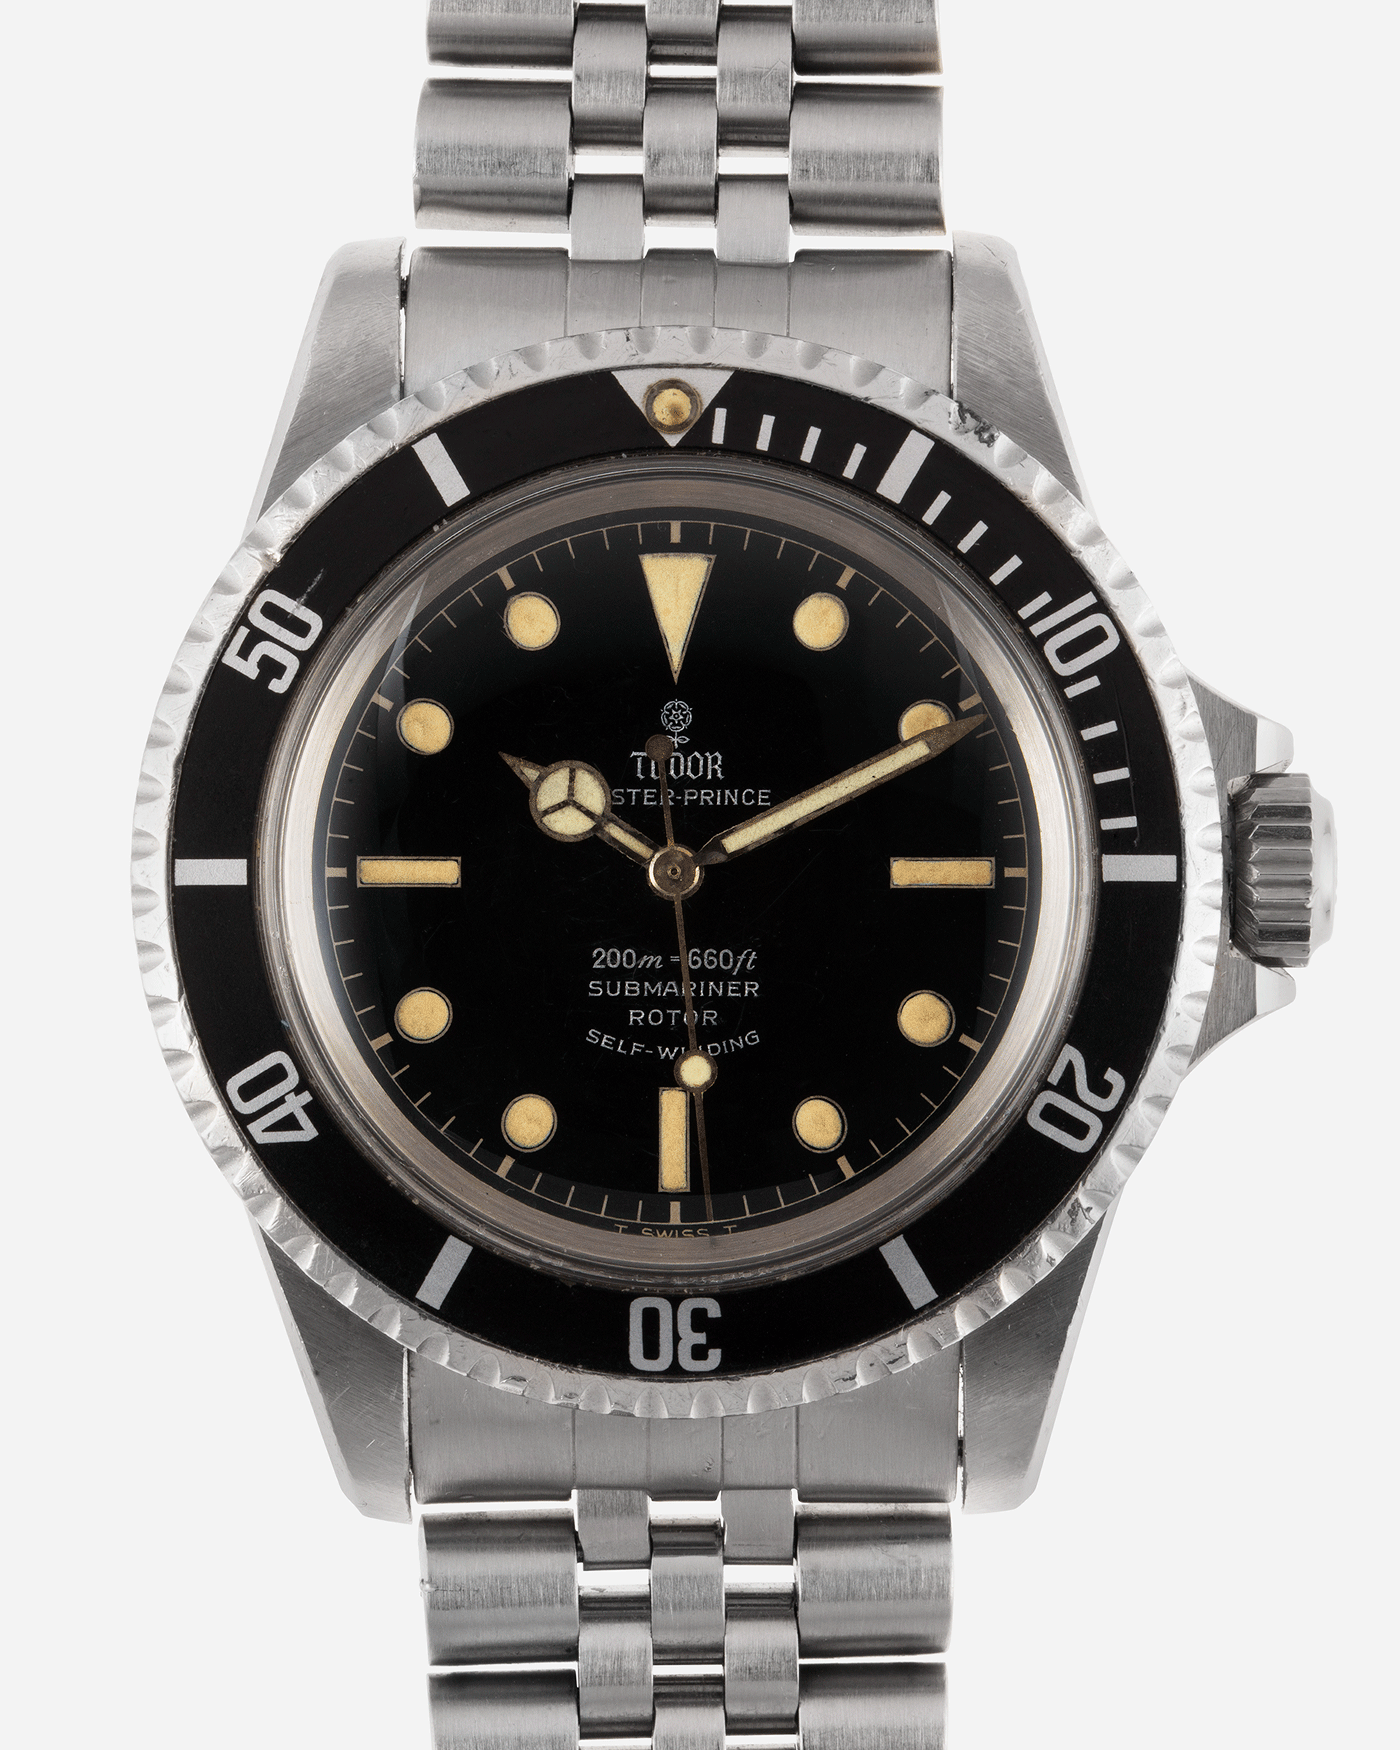 Brand: Tudor Year: 56XXXX Model: Submariner Reference Number: 7928 Serial Number: 1966 Material: Stainless Steel Movement: Cal. 390 Case Diameter: 39mm Lug Width: 20mm Bracelet: Rolex 62510H Jubilee with 555B End Links